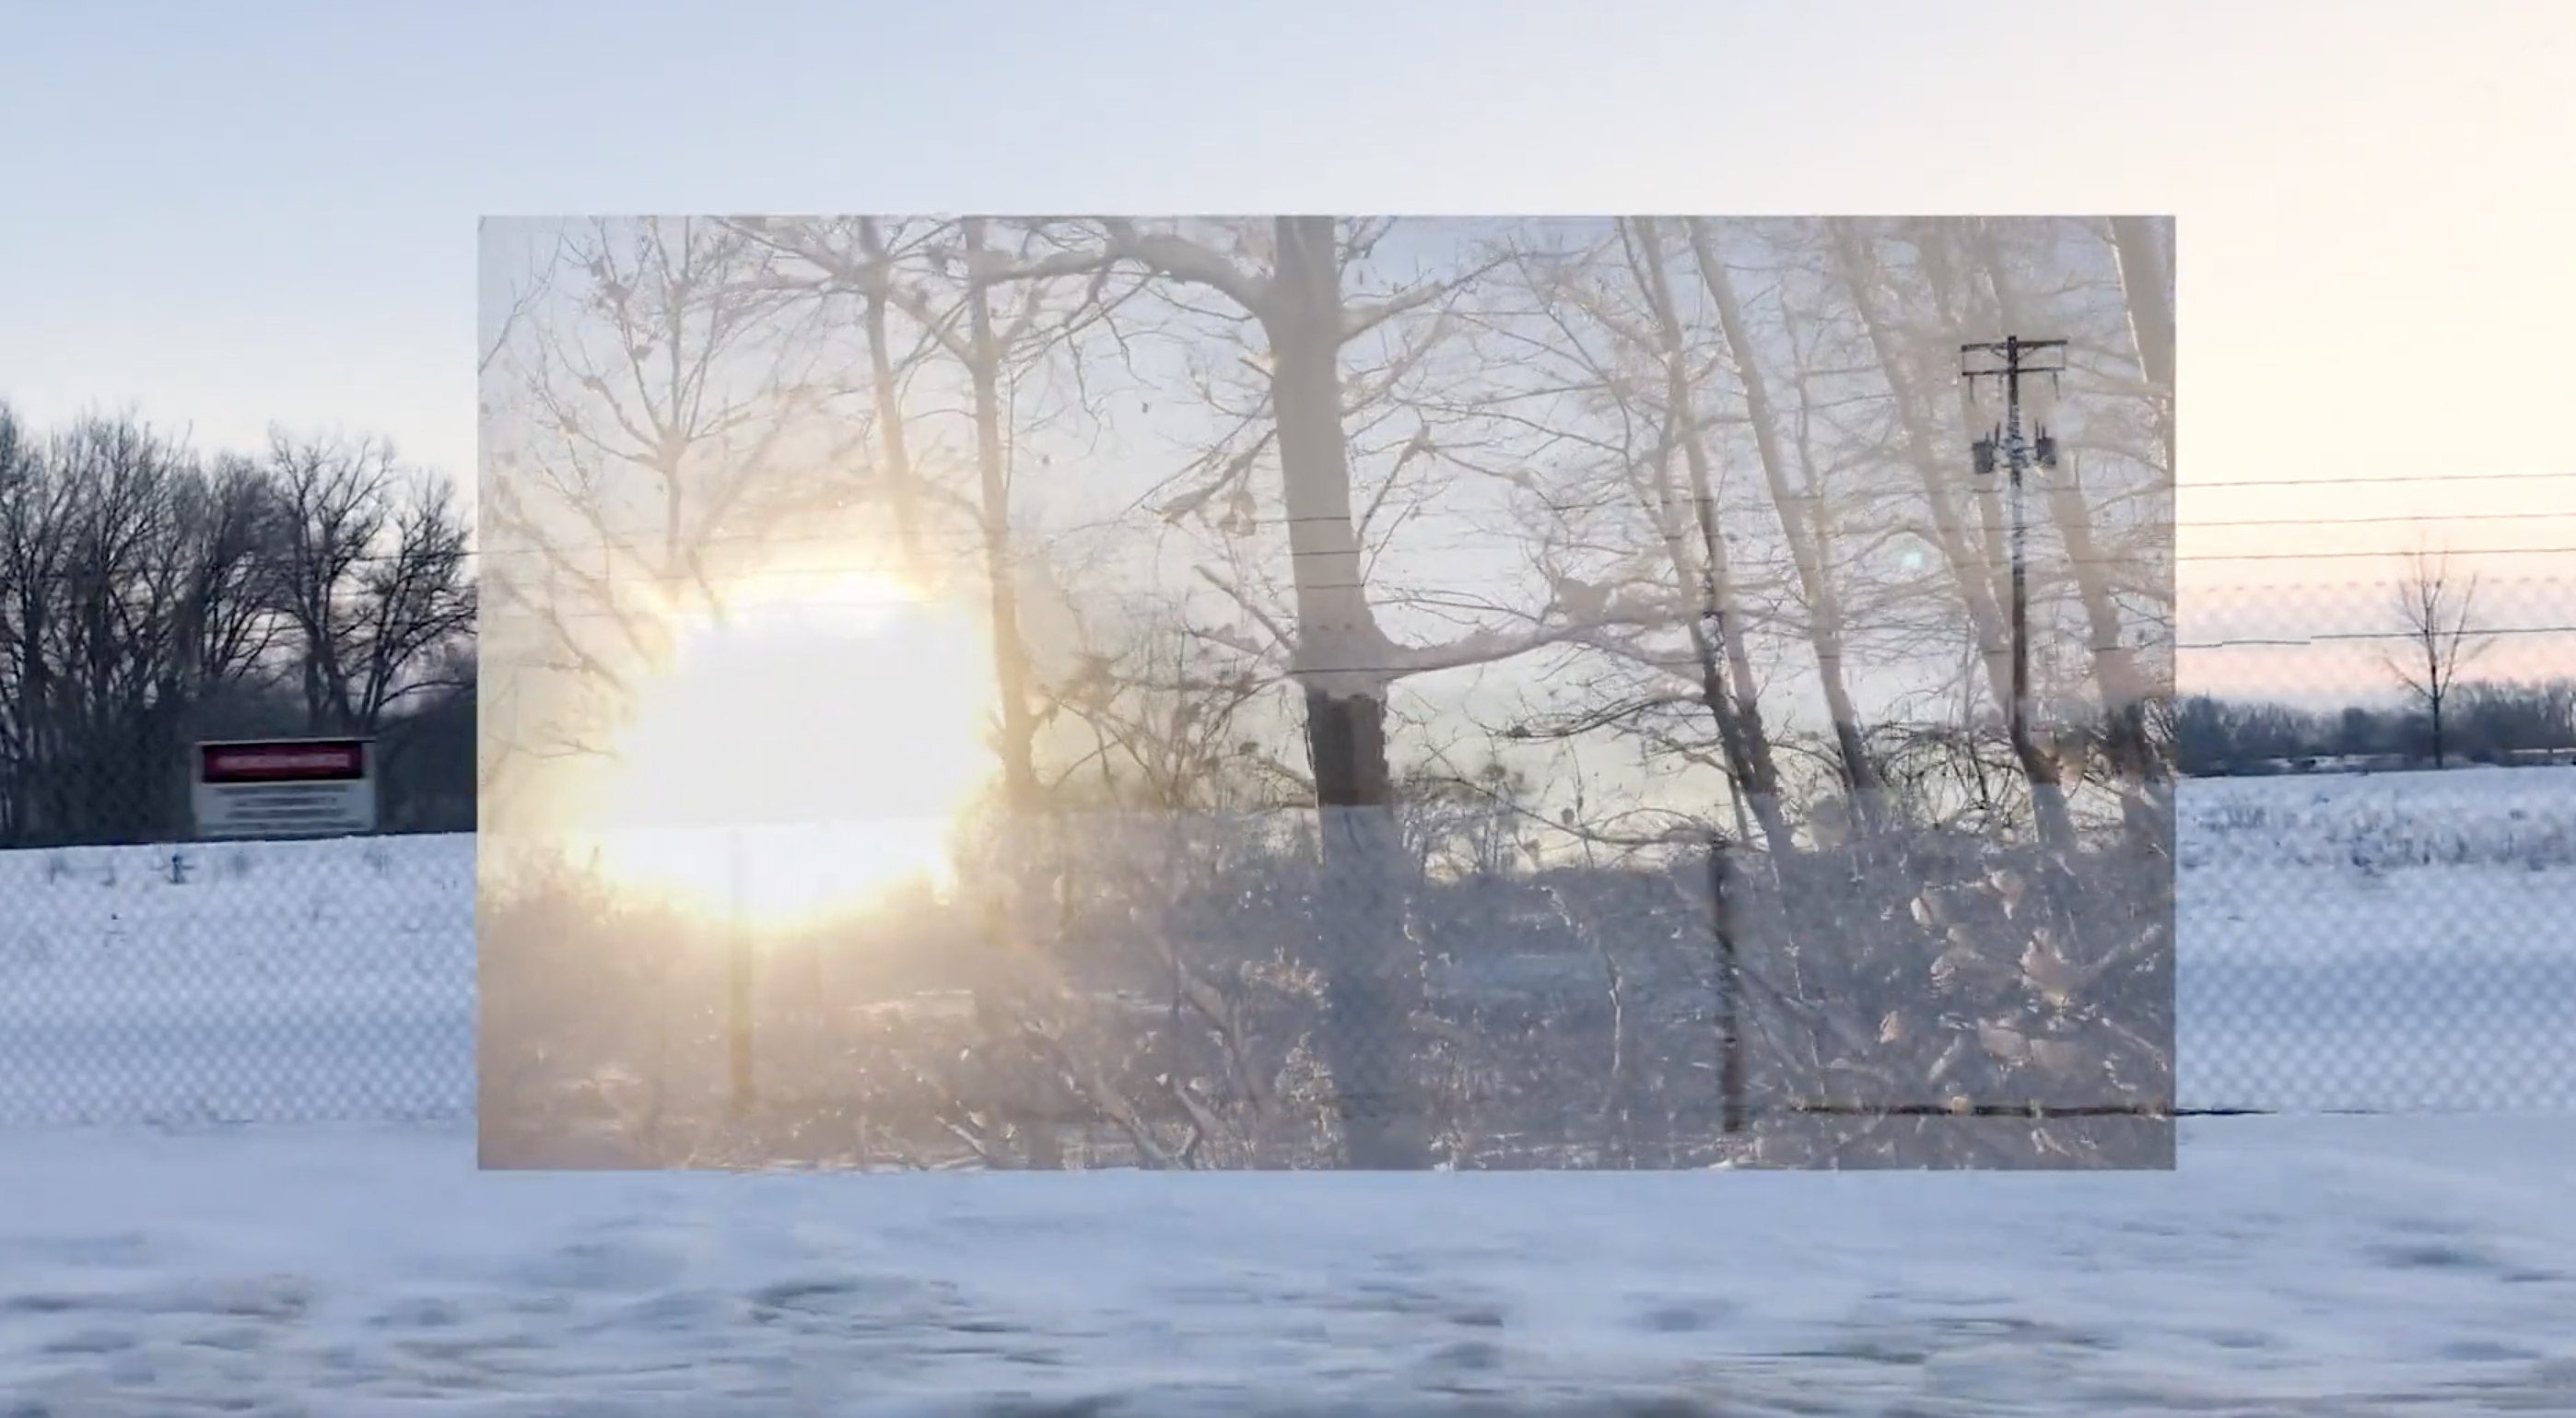 Image of snowy woods and setting sun laid over another image of snowy field.